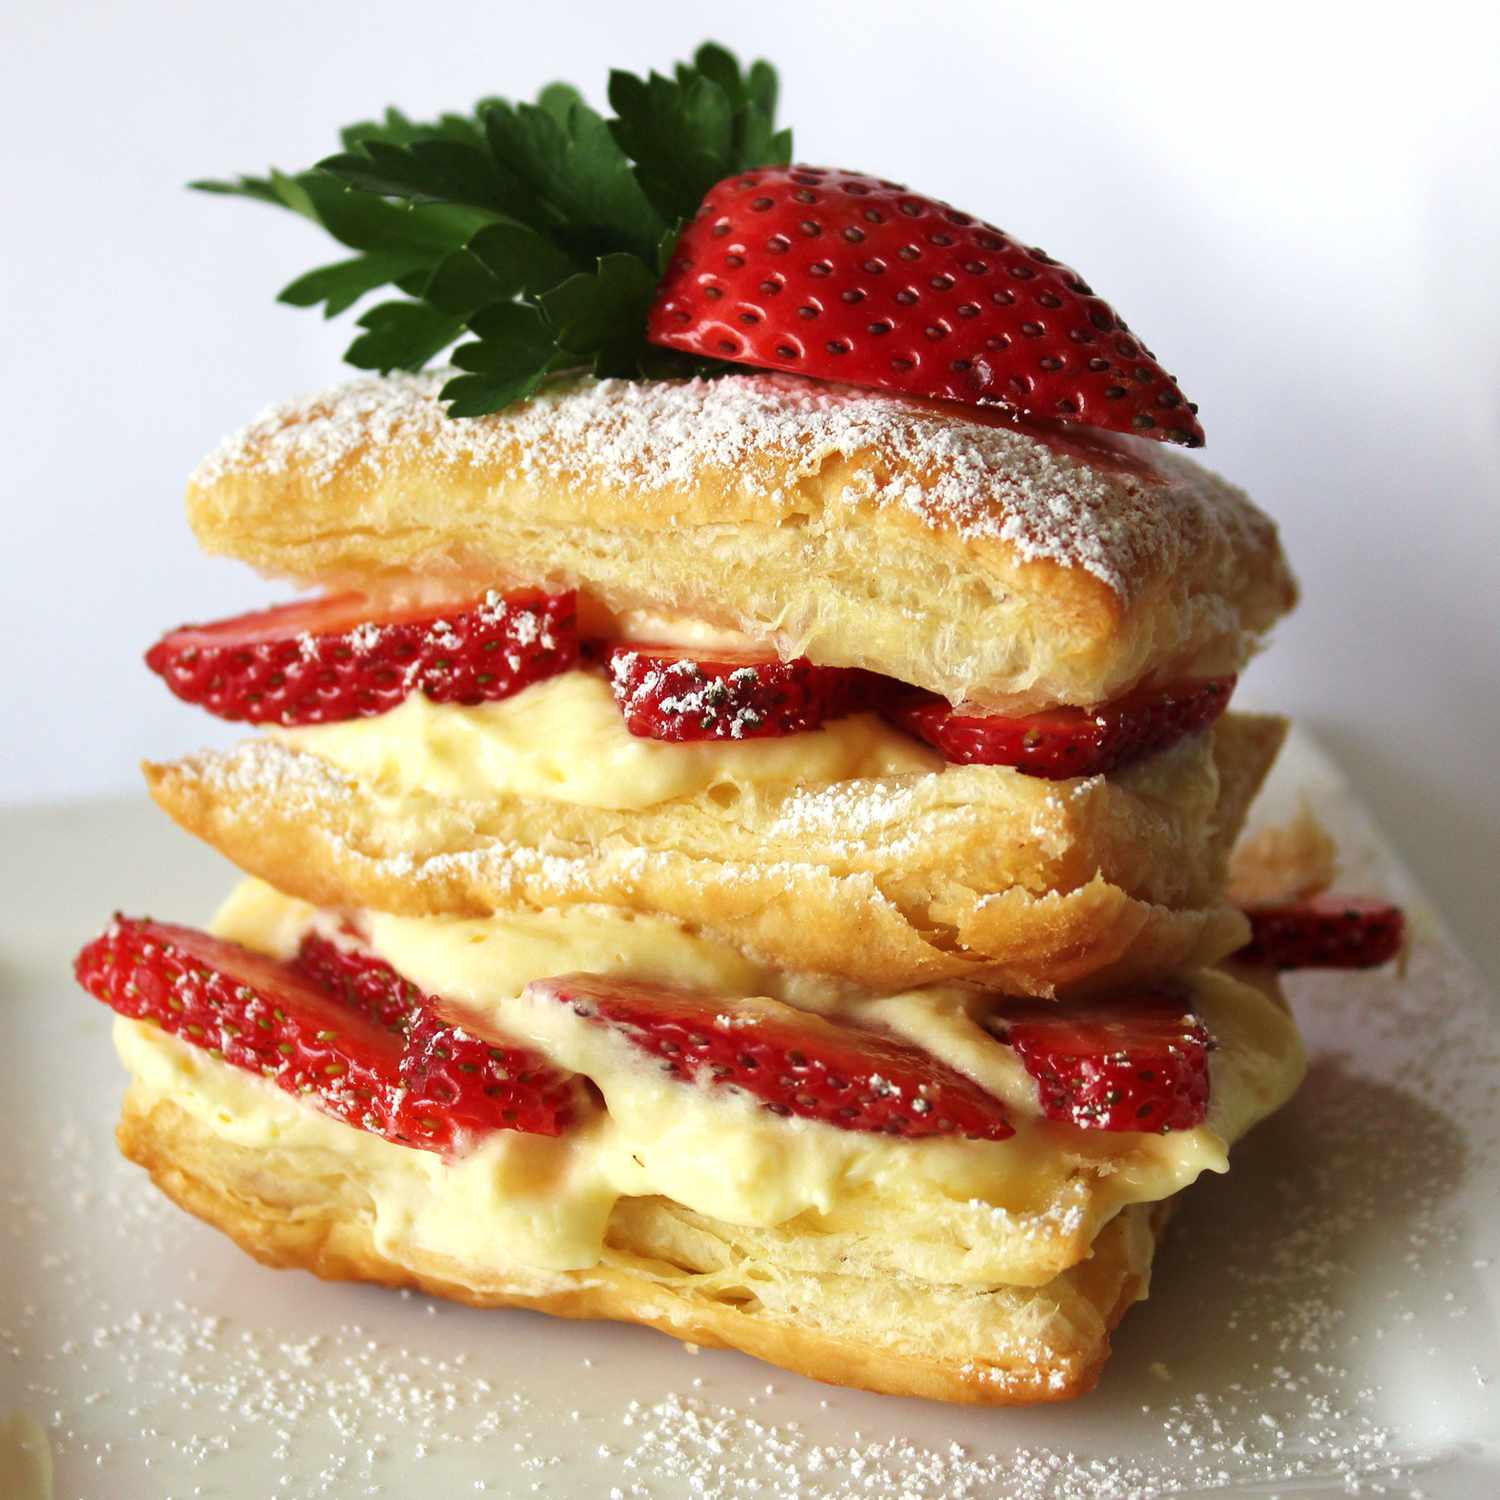 Close up view of Strawberry Napoleons with sliced strawberries and cream, garnished with powdered sugar on a white plate